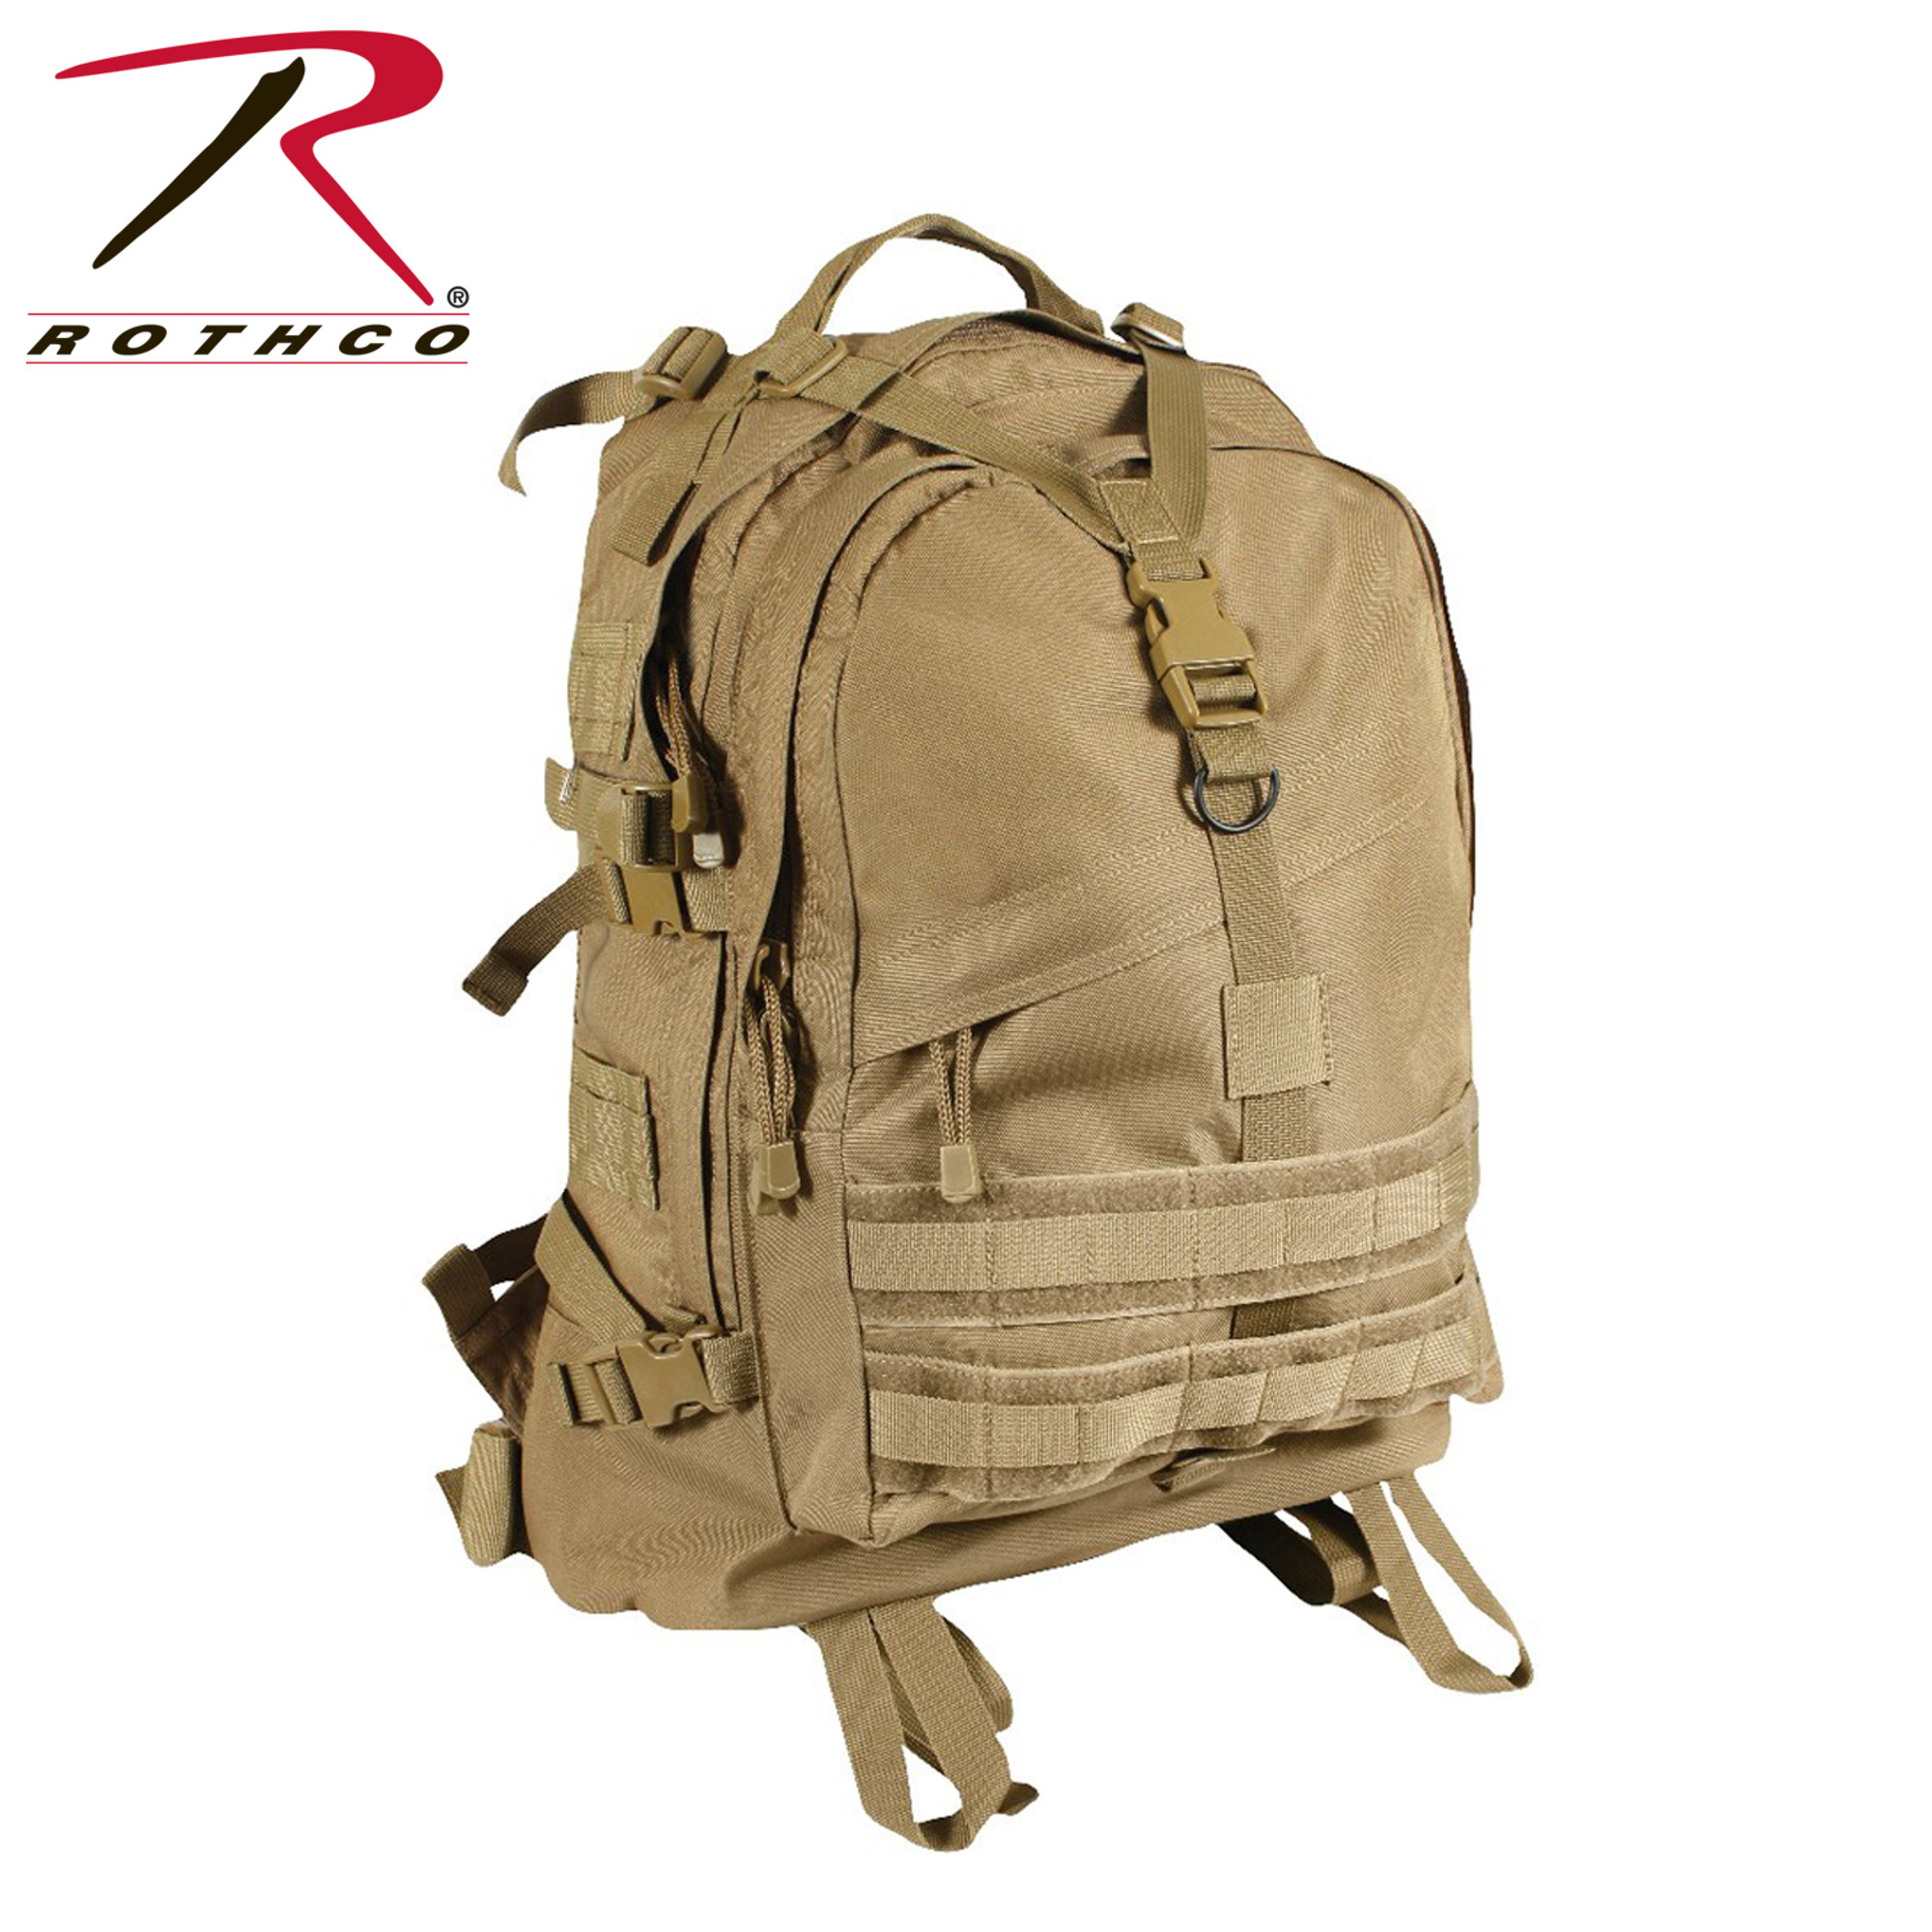 Rothco Large Transport Pack - Coyote Brown